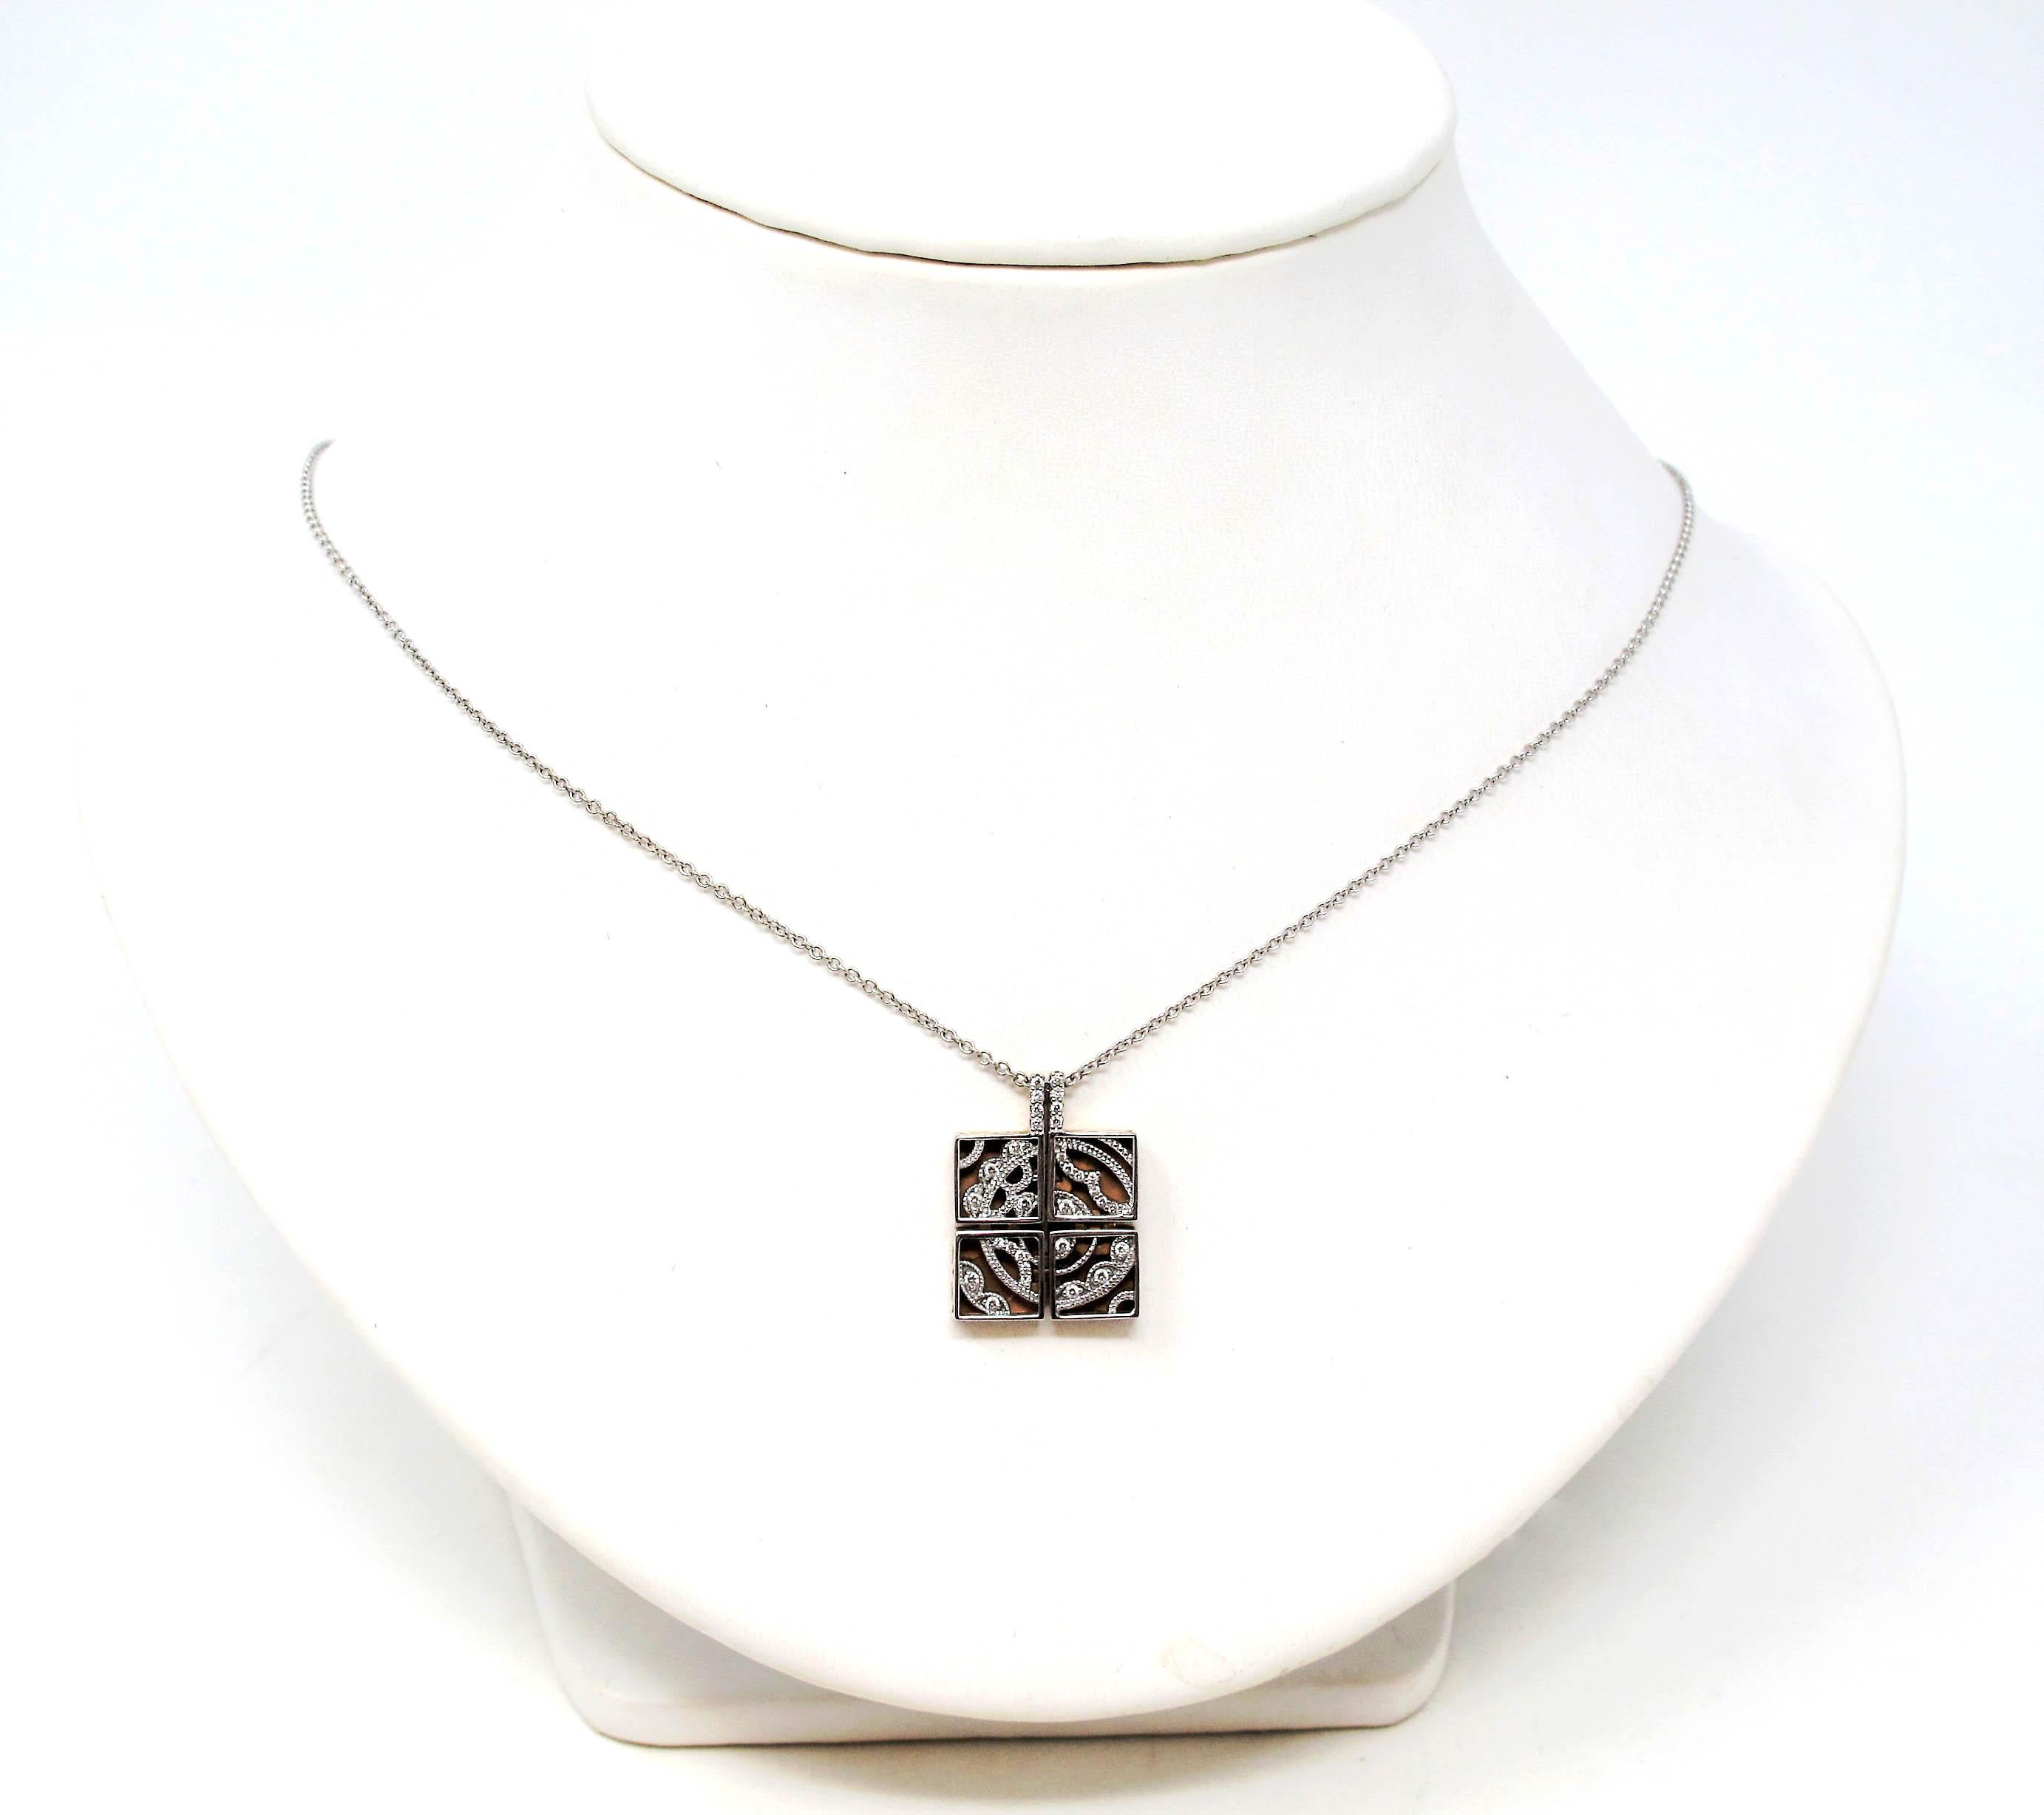 Tacori Diamond Sectioned Square Pendant Necklace in 18 Karat White and Rose Gold For Sale 1